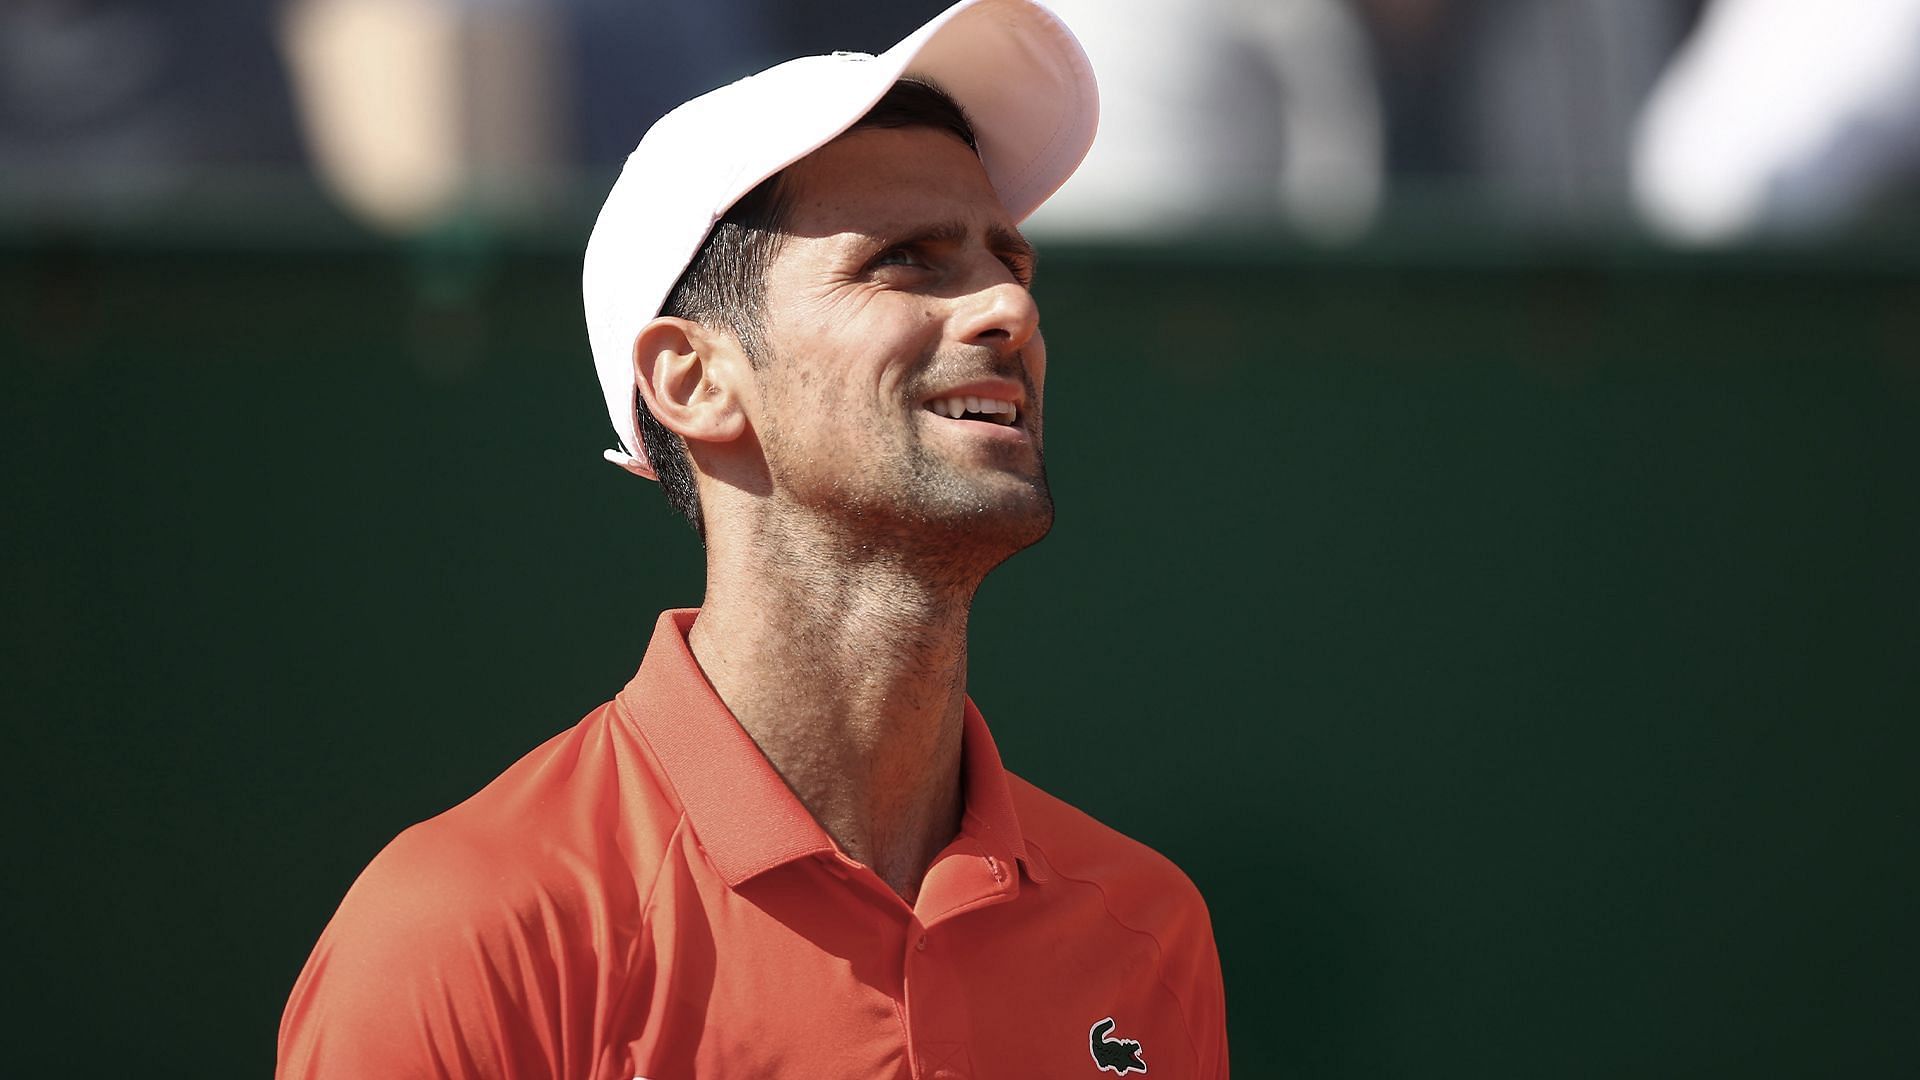 Novak Djokovic opened up on the unjust criticism he faces from tennis media.